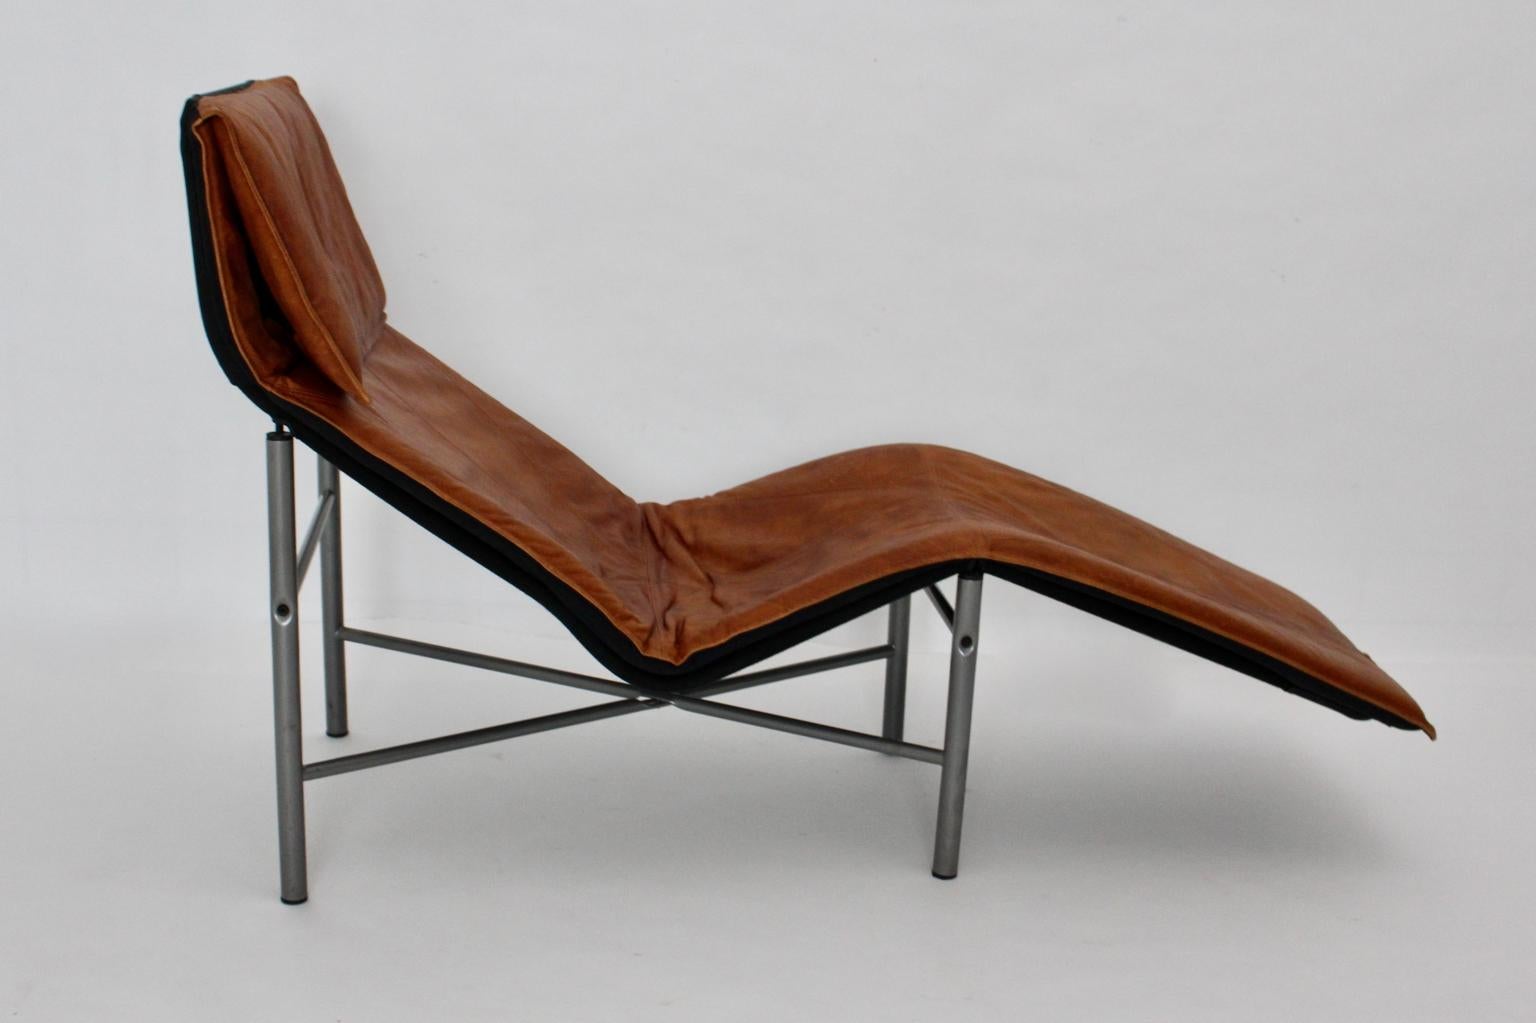 Metal Leather Vintage Chaise Longue by Tord Bjorklund Sweden, 1970s